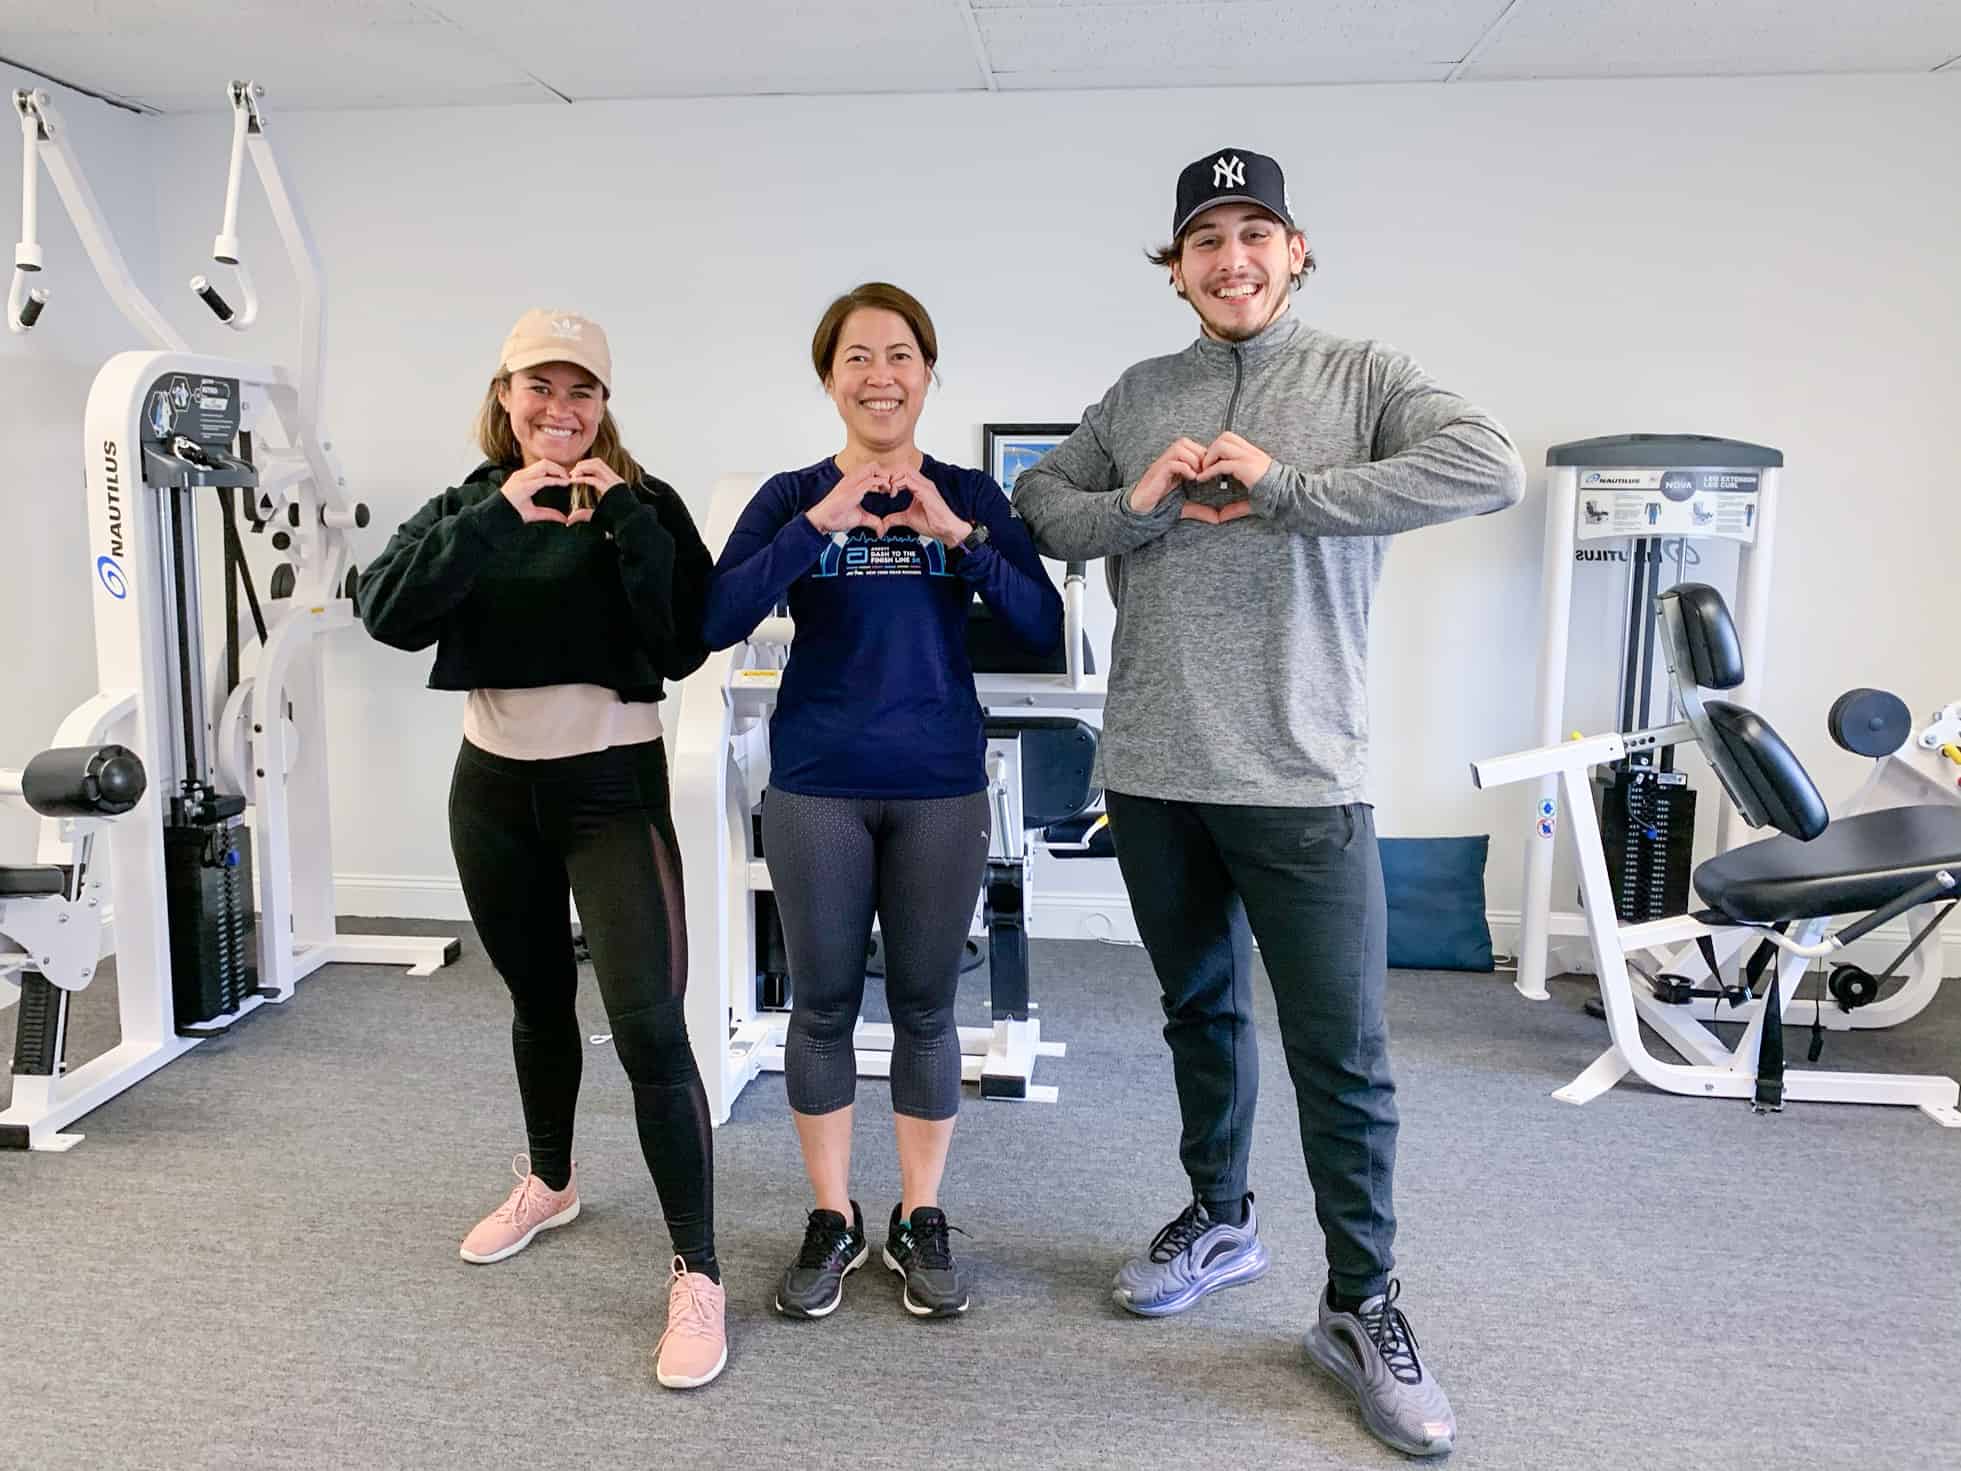 3 Loyalty Fitness trainers in front of equipment with hands in shape of heart.